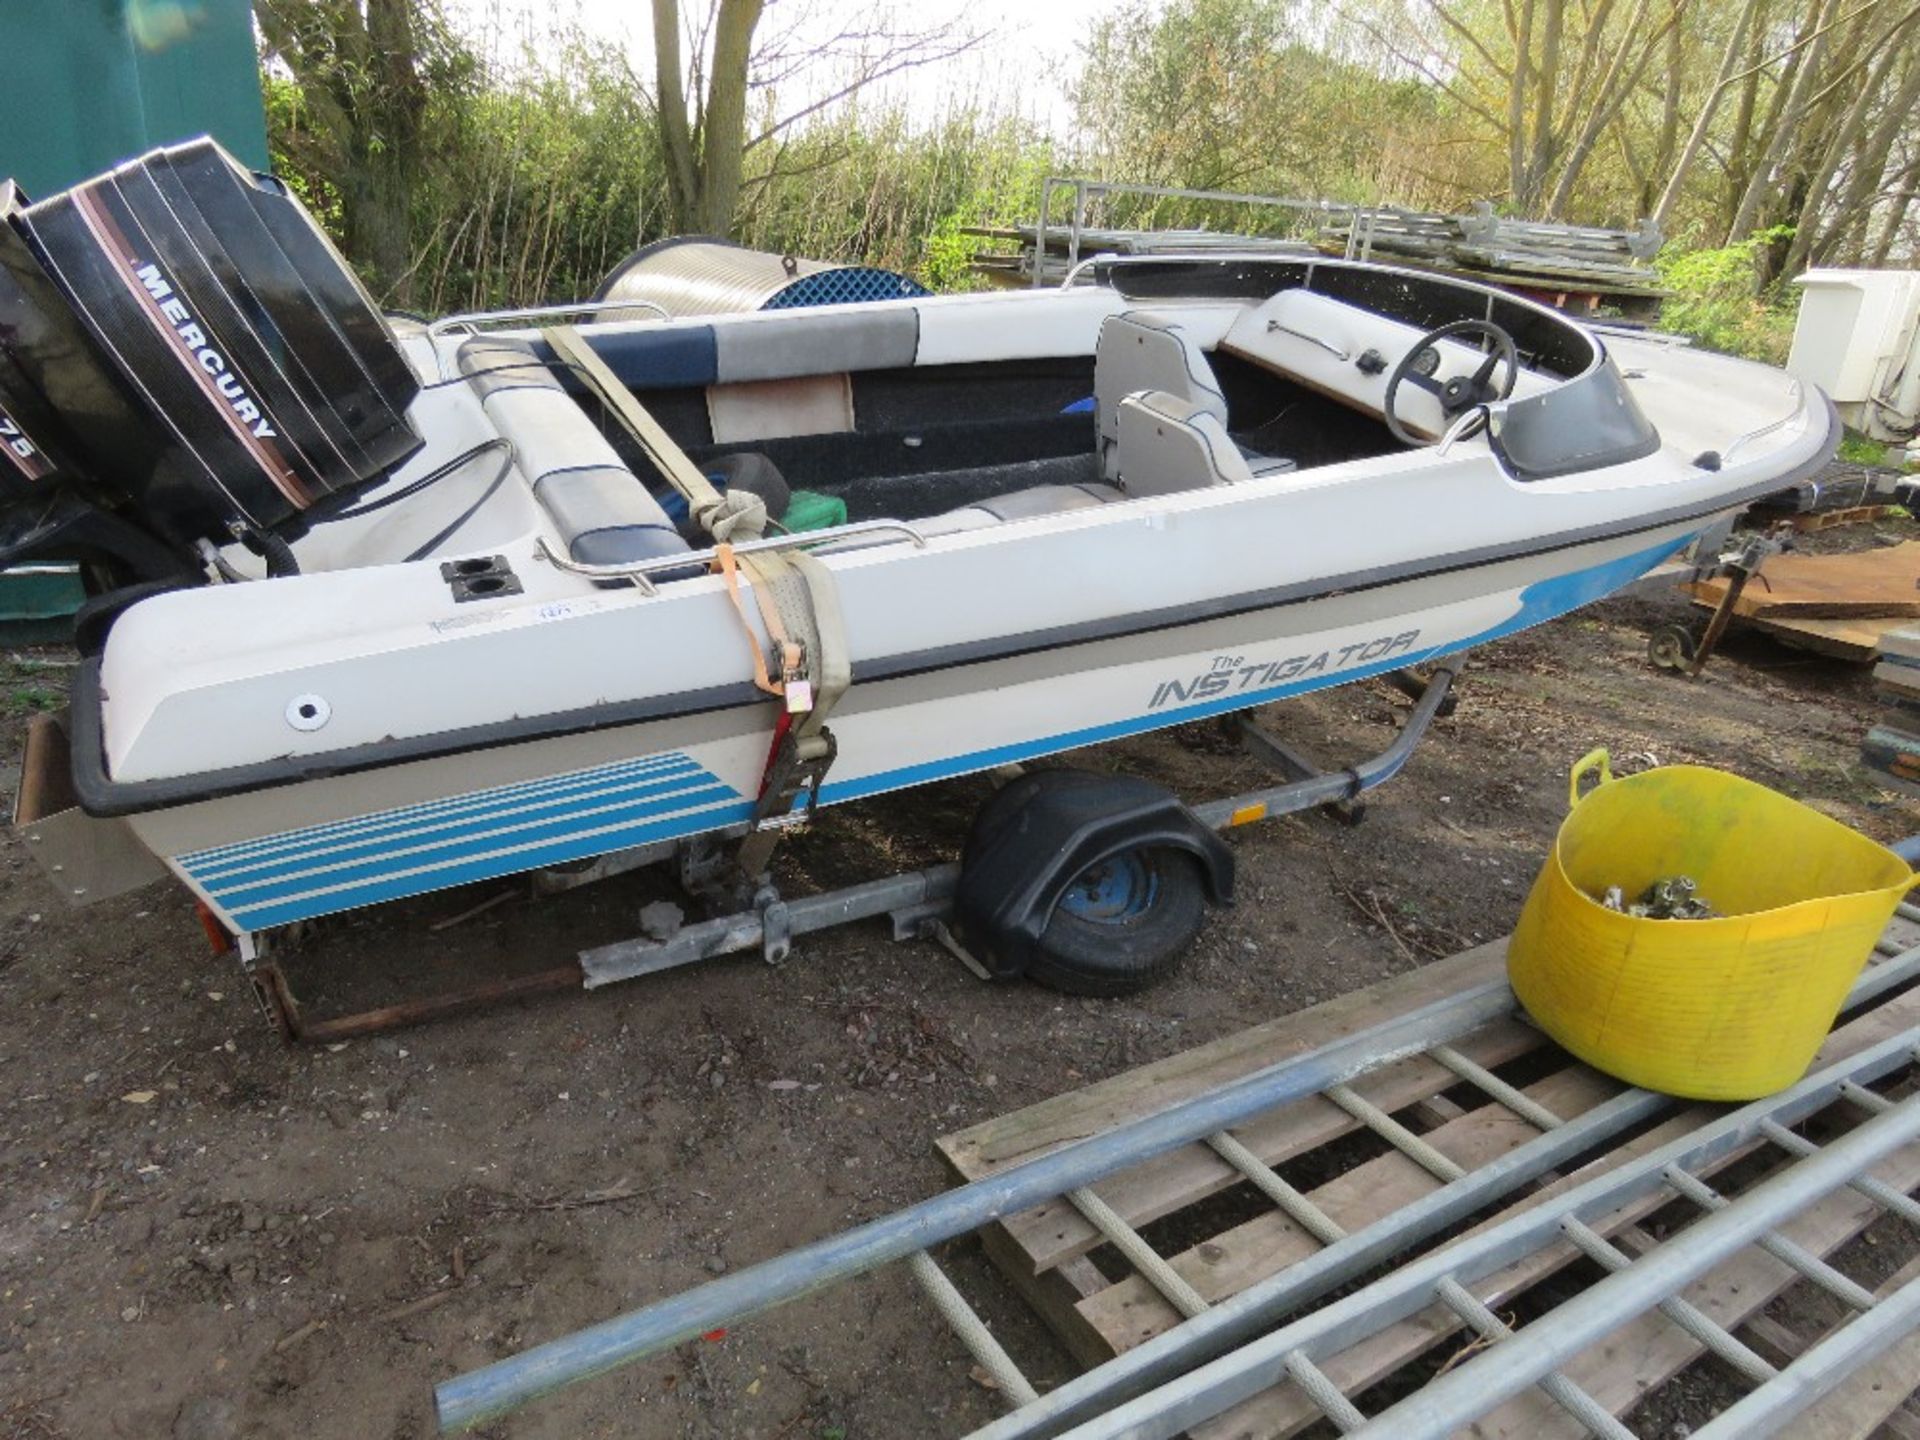 SPEED BOAT, 15FT LENGTH APPROX ON SINGLE AXLE TRAILER (AXLE NEEDS ATTENTION). MERCURY 75HP 2 STROKE - Image 2 of 9